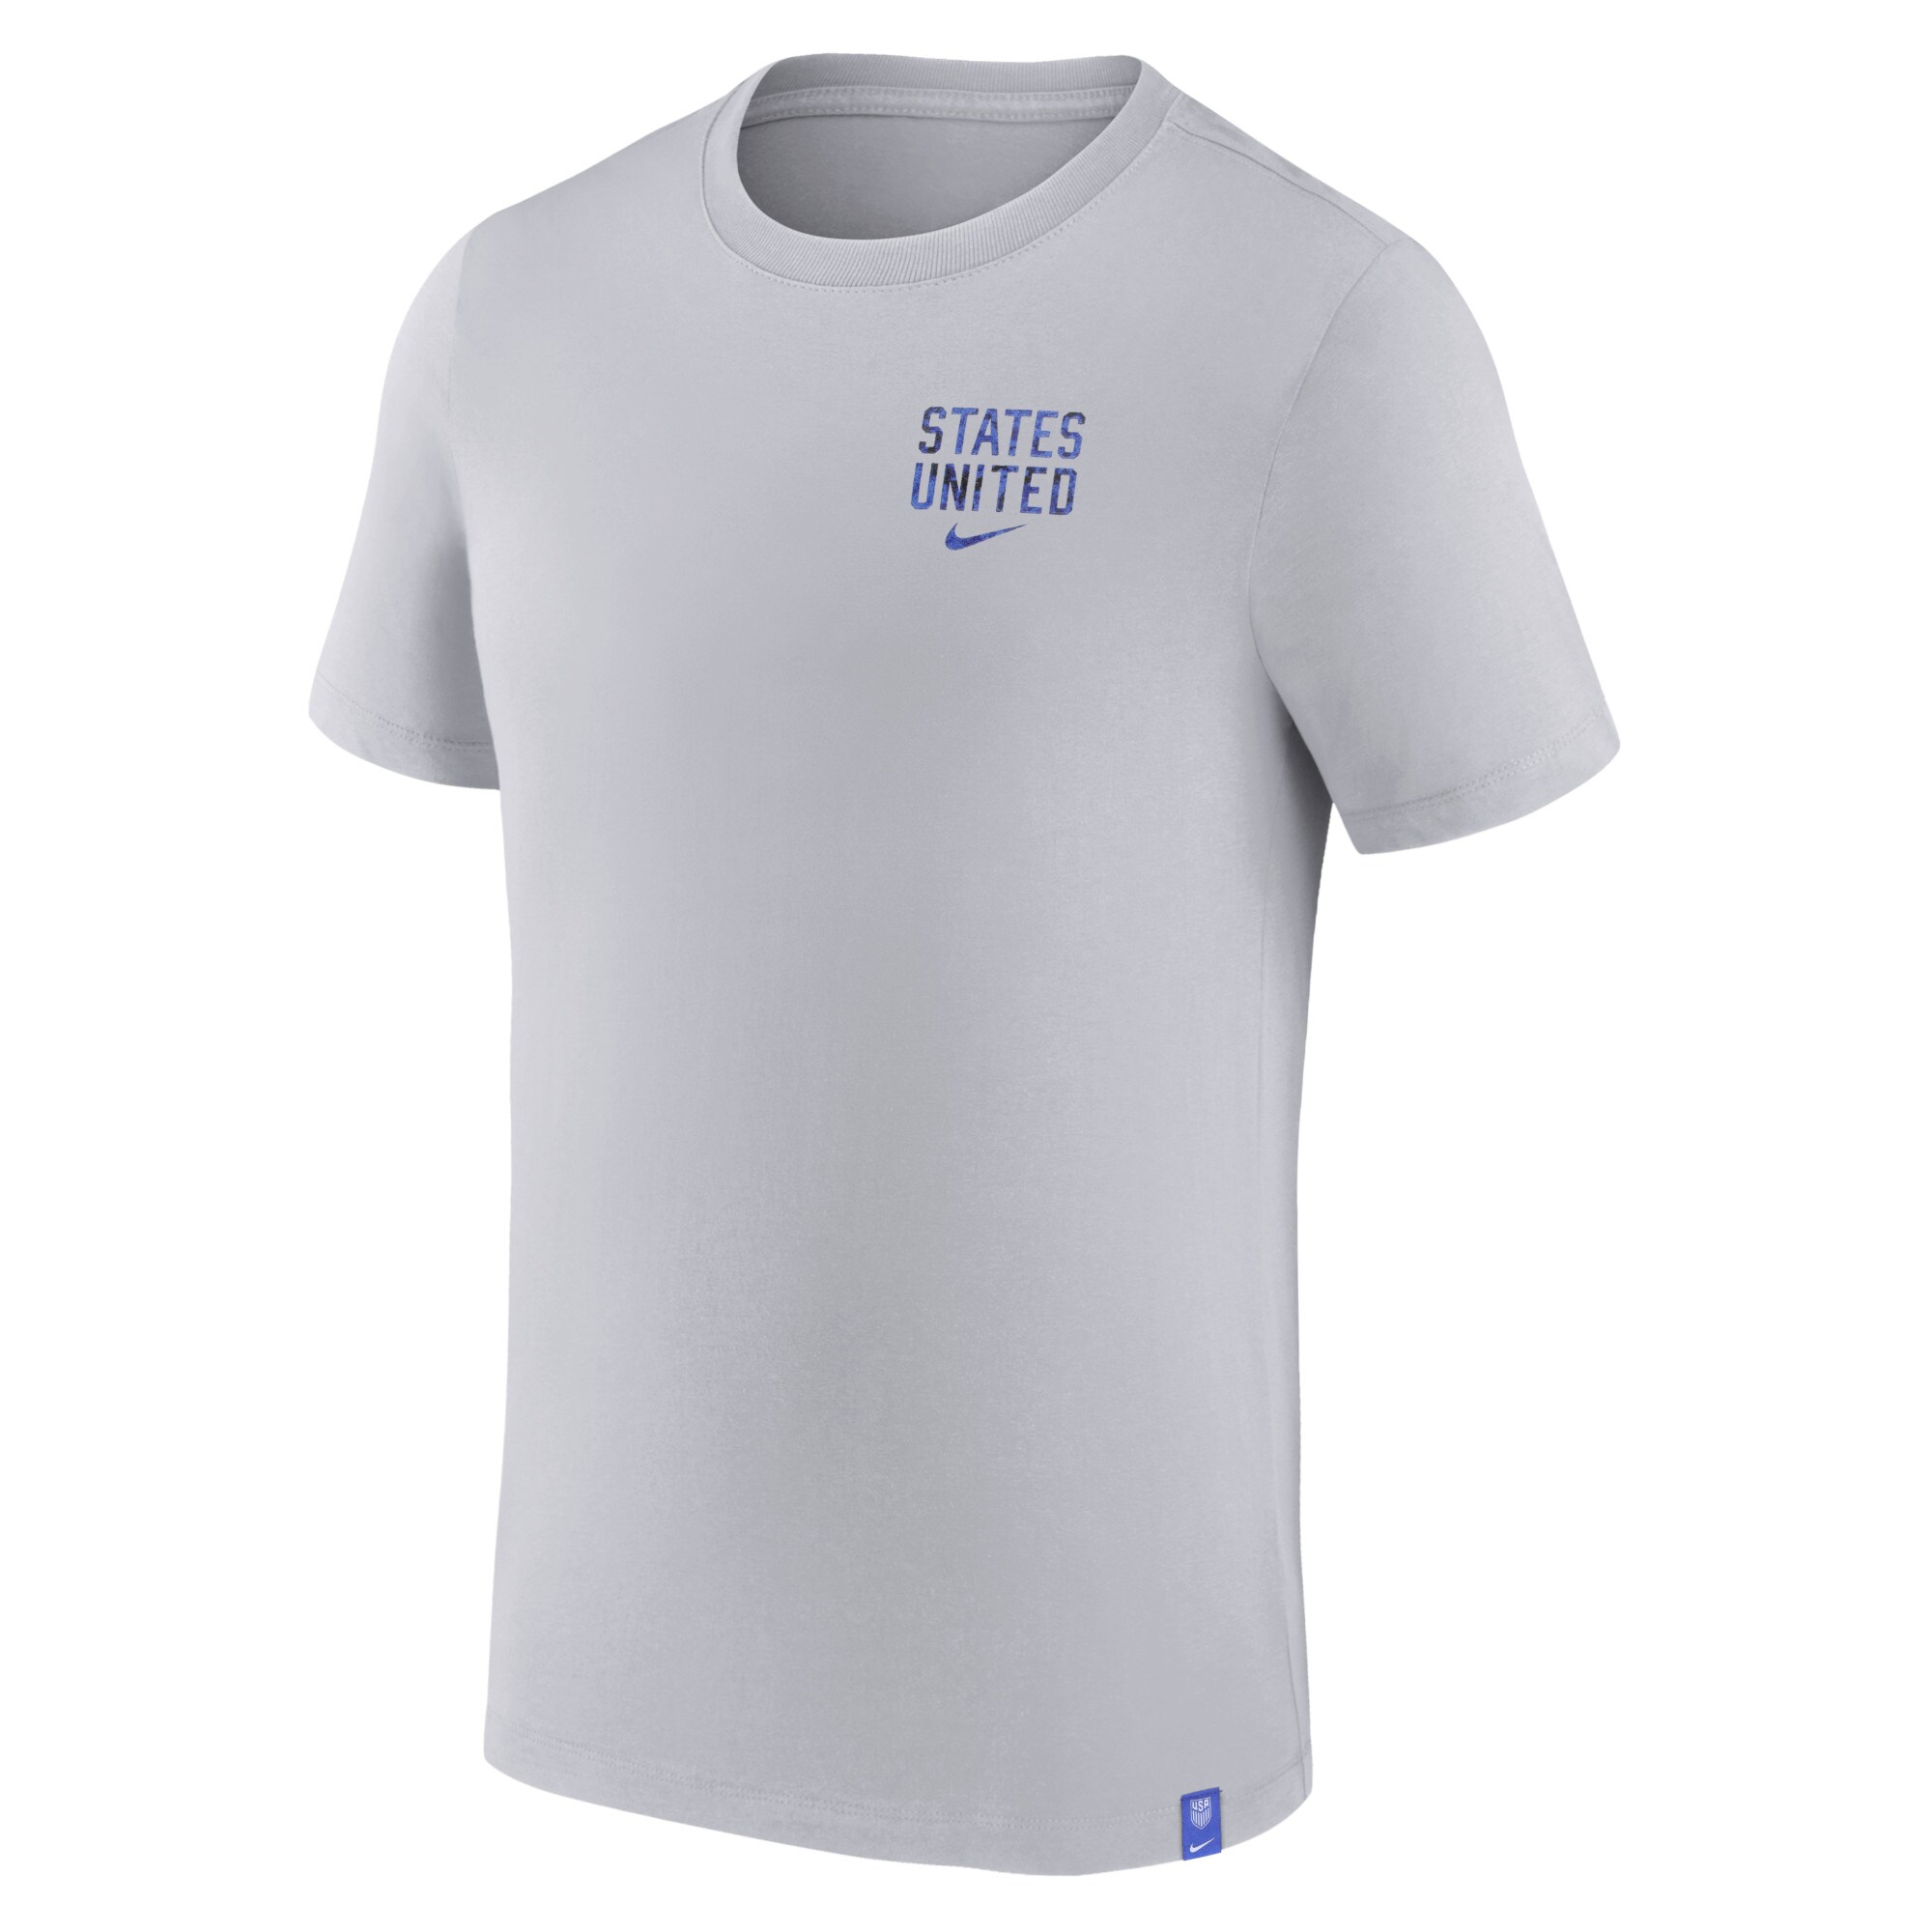 Equip Claim Many dangerous situations stefanssoccer.com:Nike USA Voice Tee - Light Grey